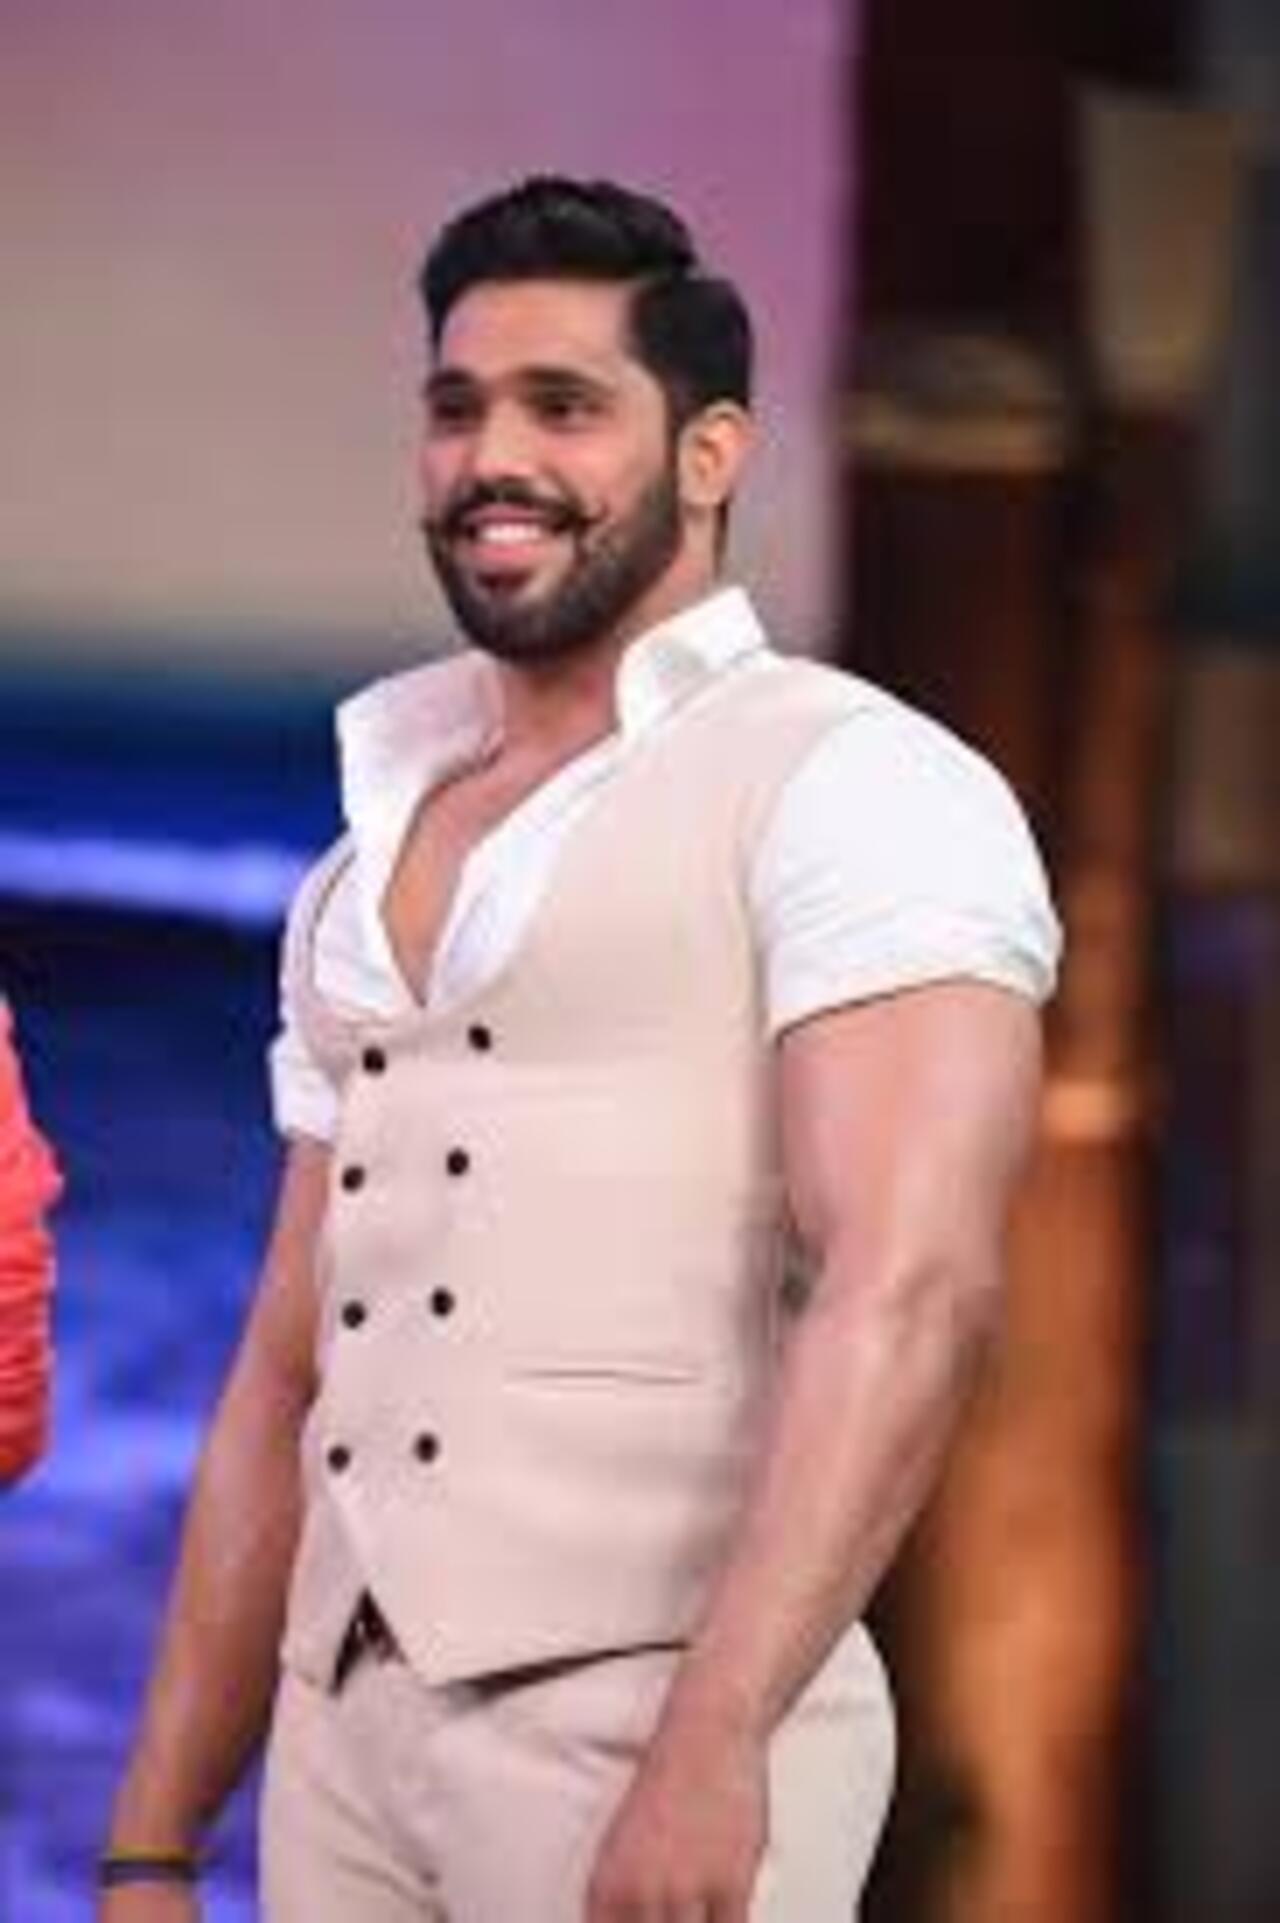 Shivashish Mishra was expelled from the Bigg Boss house for violating its rules. The housemates had chosen him to spend time in the jail, but he declined the task. Despite a warning from Bigg Boss to adhere to the rules, Shivashish decided to exit the house